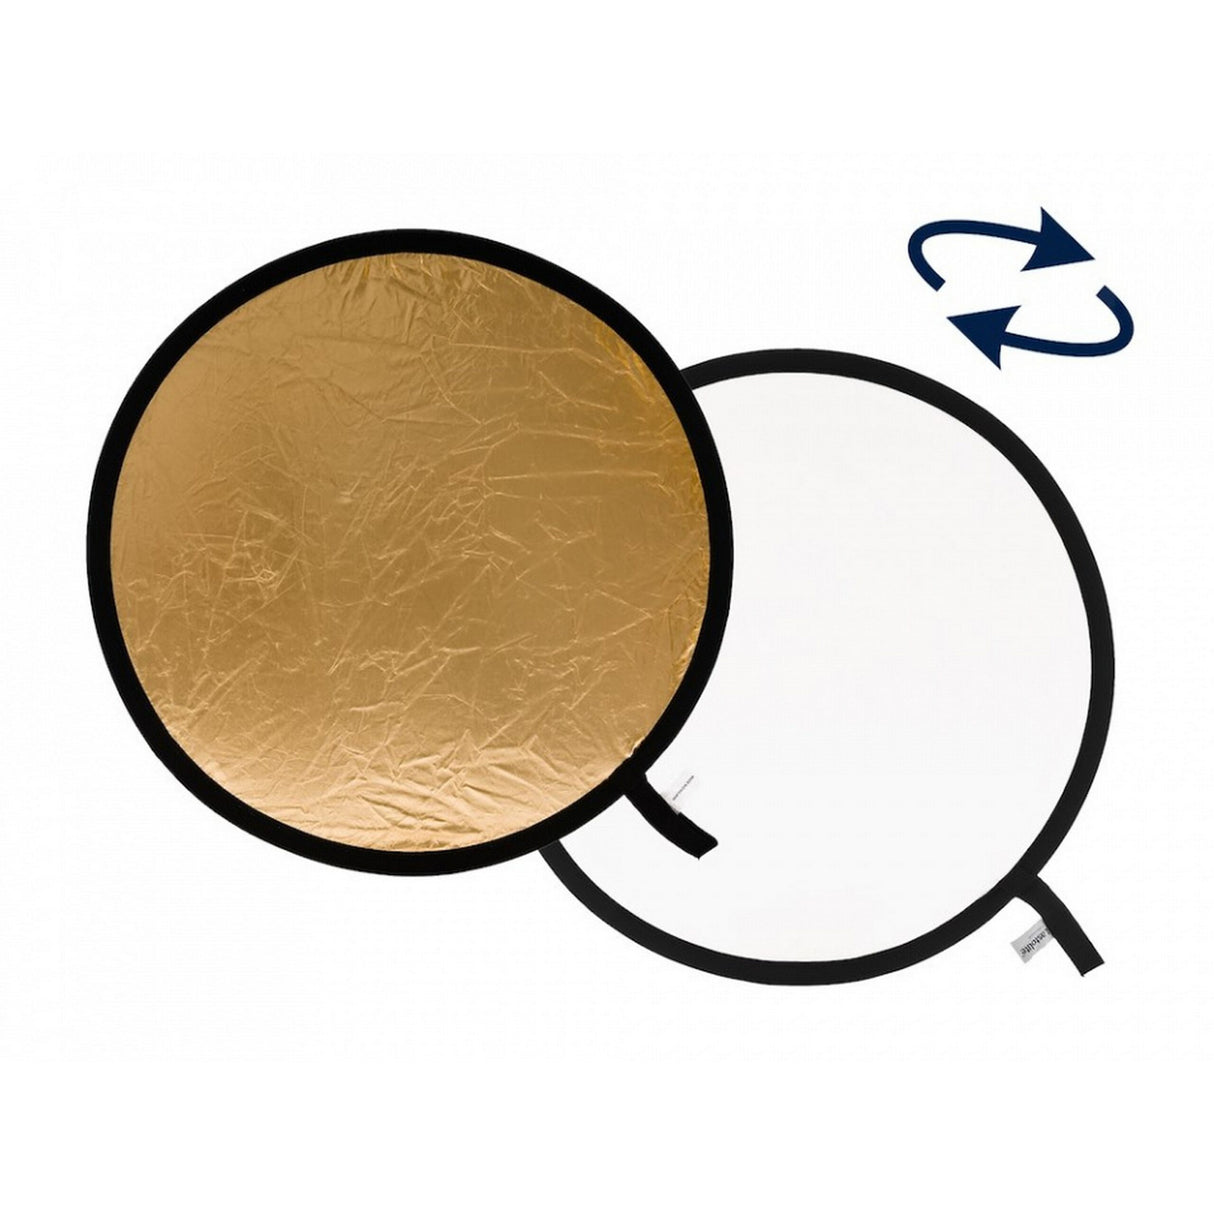 Lastolite LL LR3841 38 Inch Collapsible Reflector, Gold/White